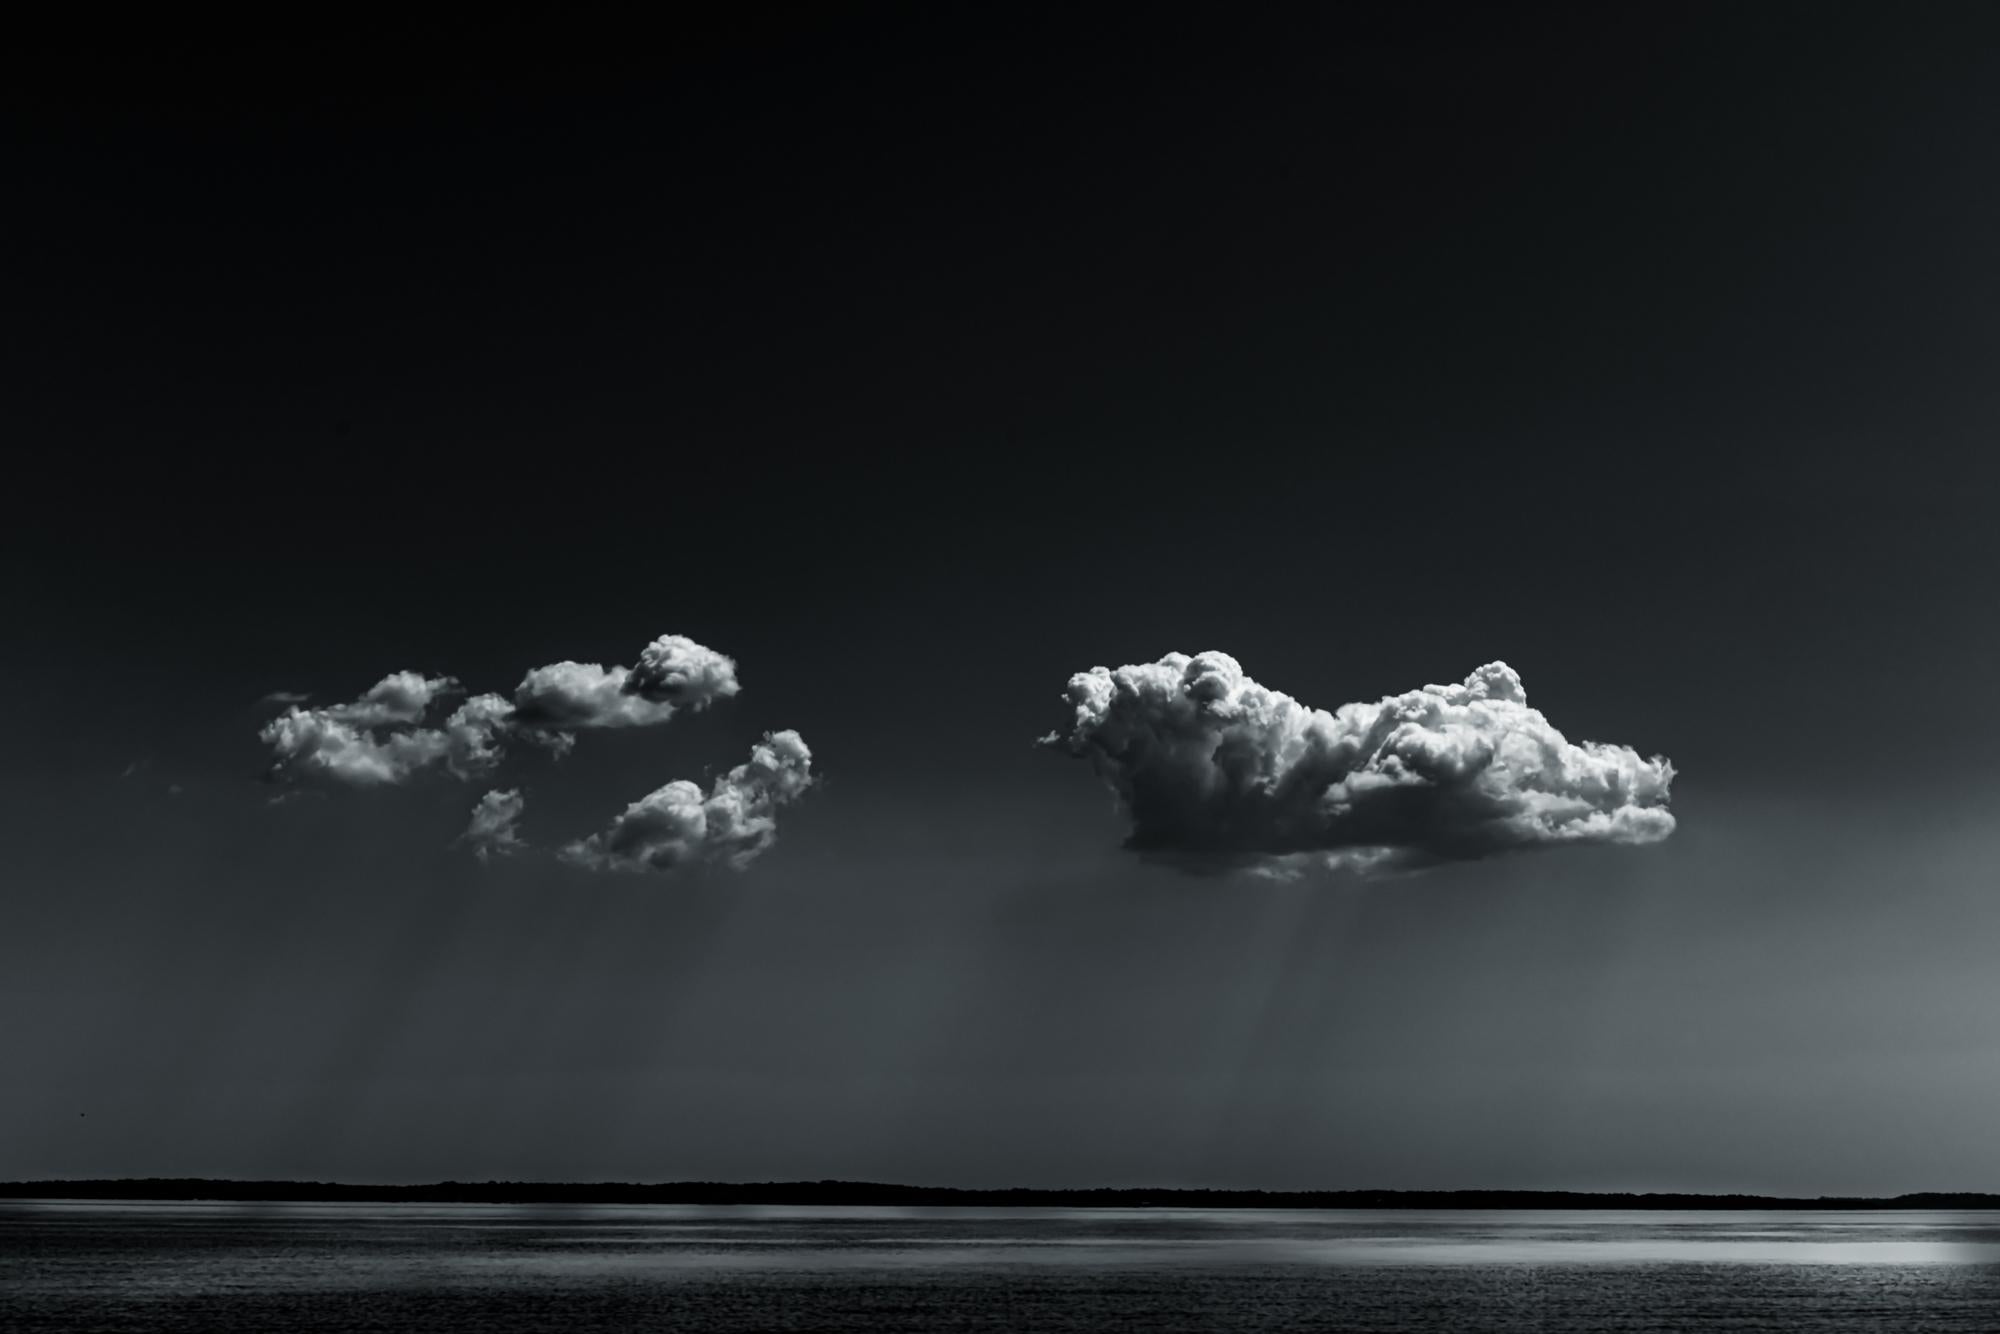 Howard Lewis Landscape Photograph - Limited Edition Black and White Photograph - " Sea Clouds #1 " 20 x 24